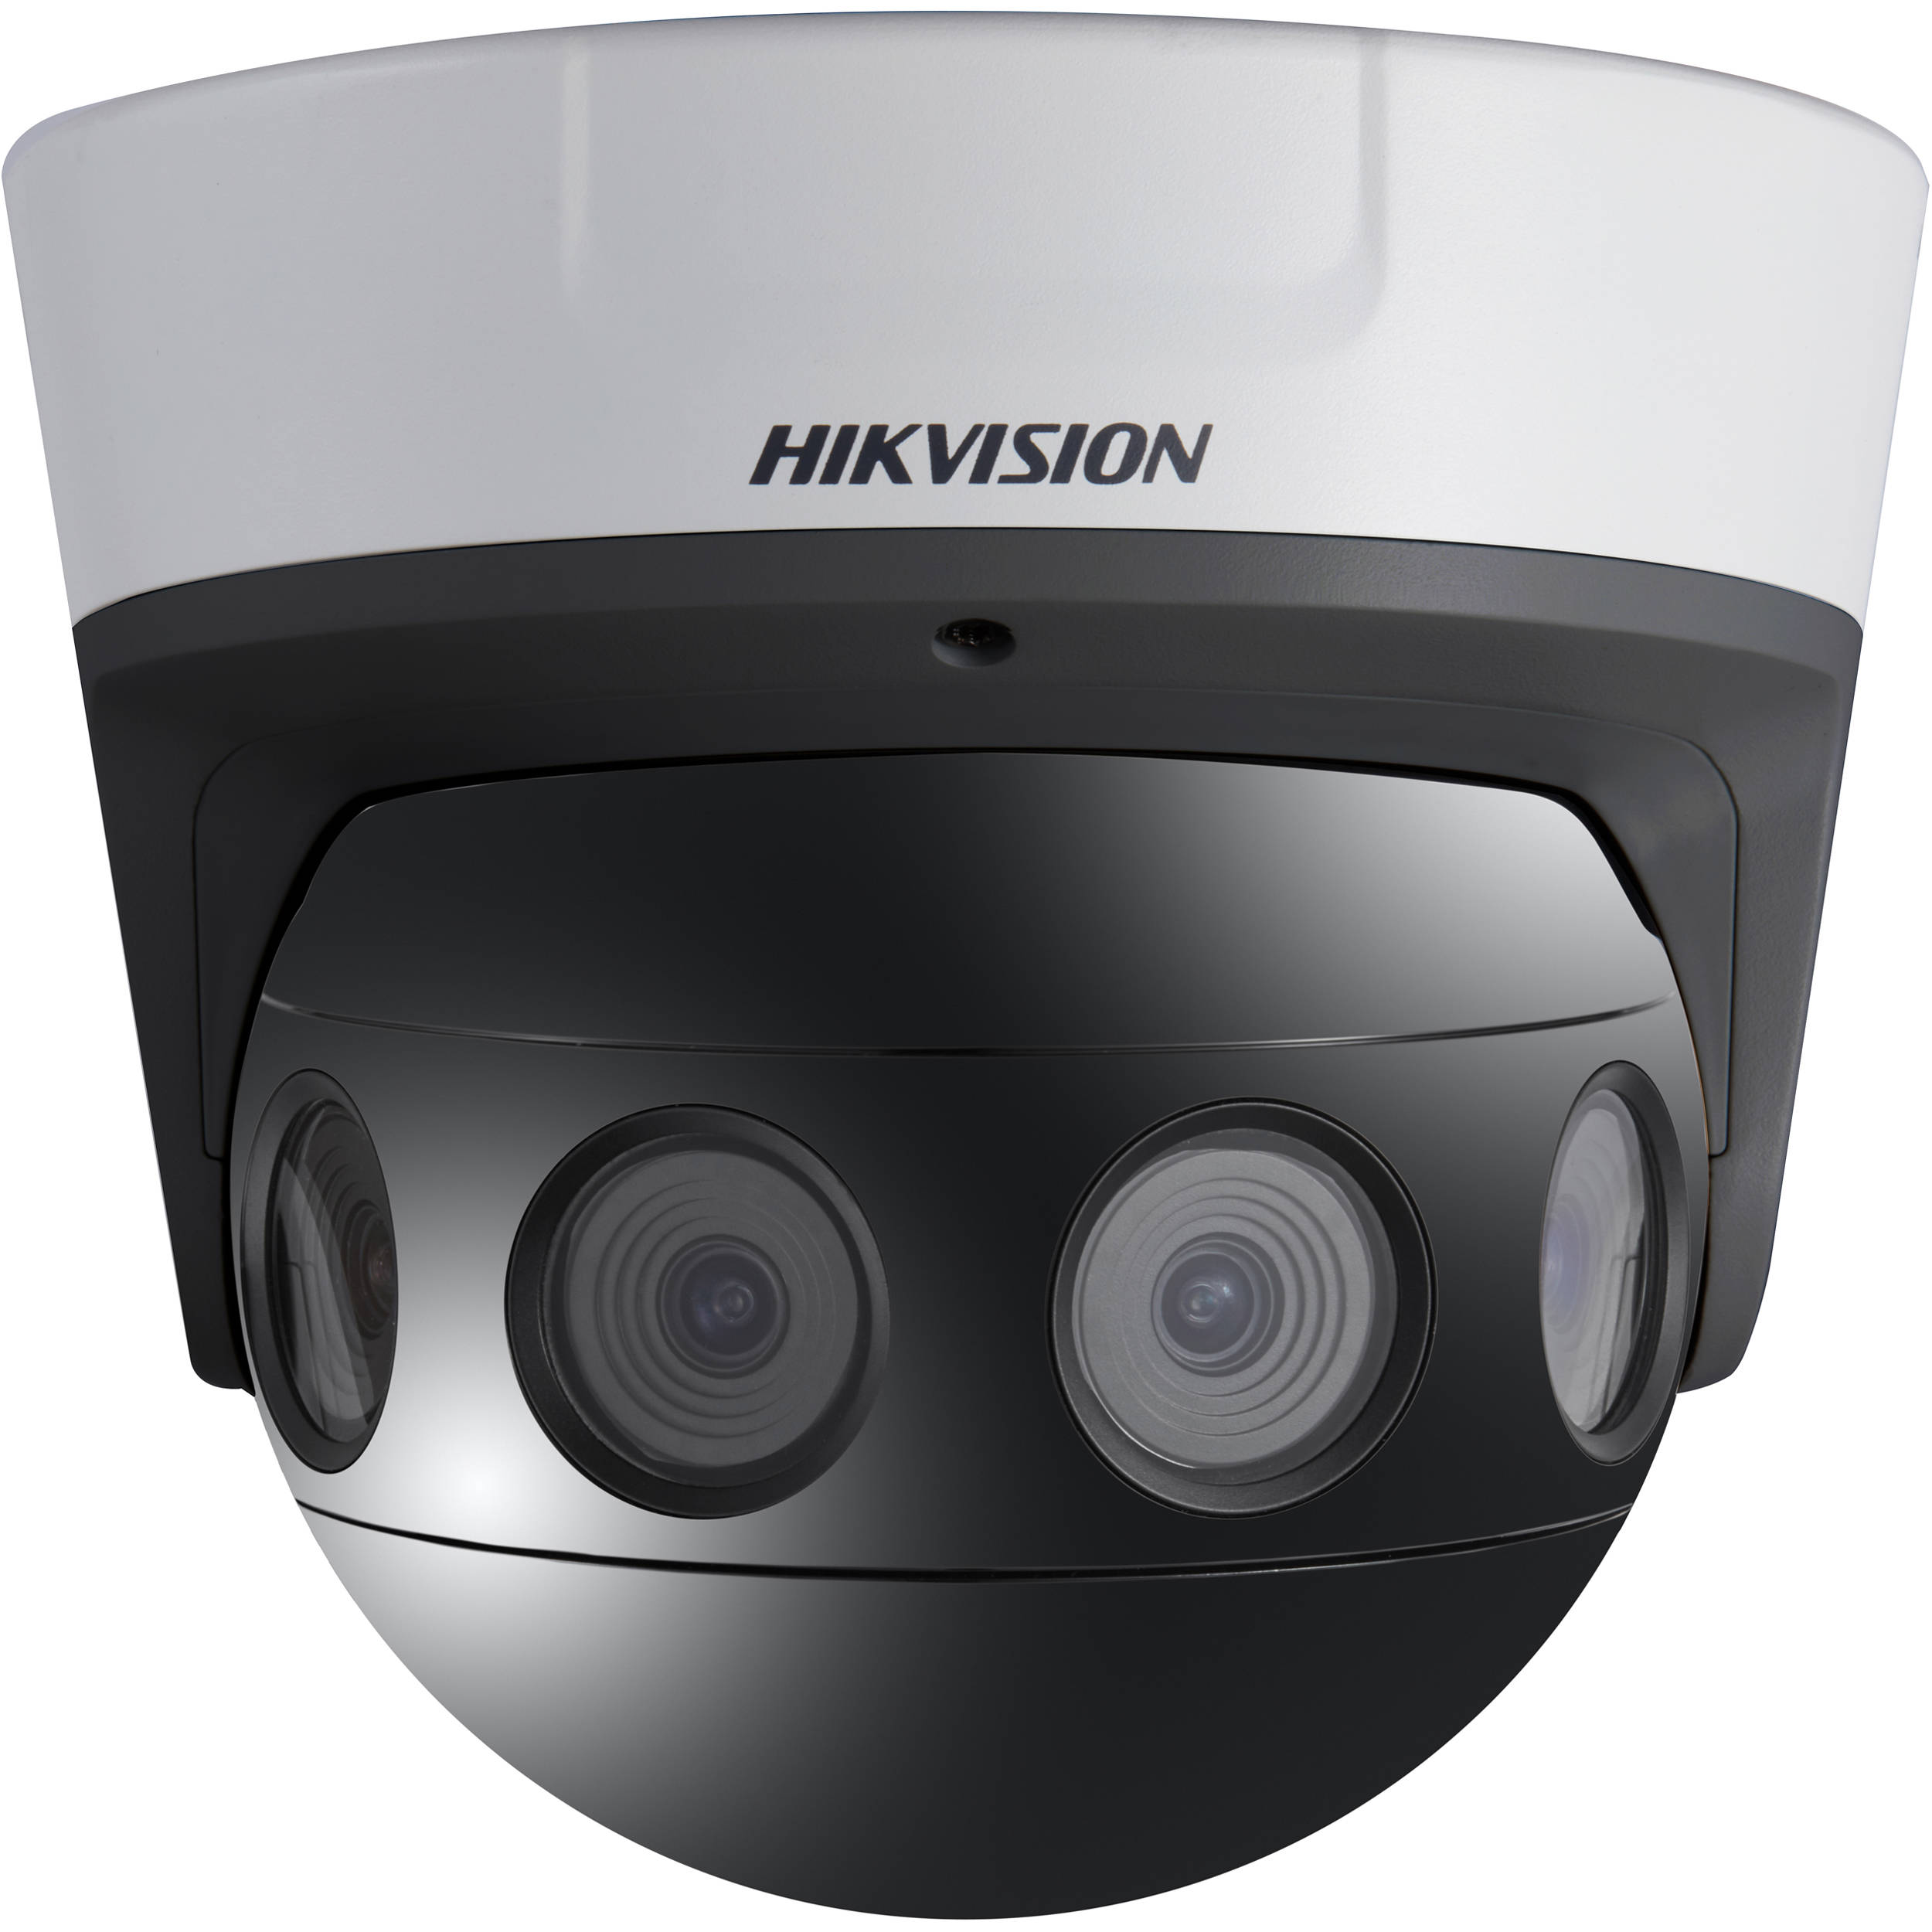 cost of hikvision camera